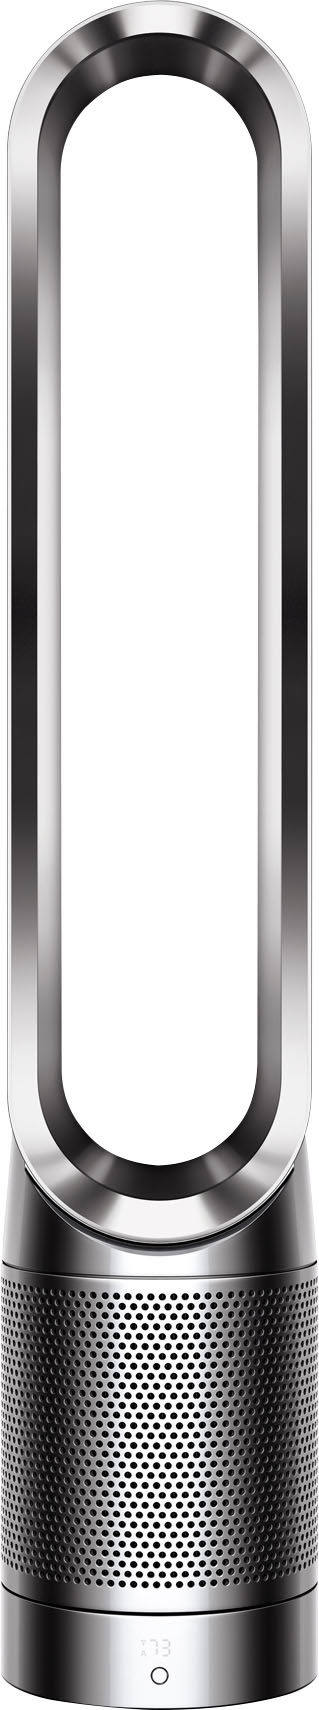 Dyson Pure Cool Link TP02 Smart Tower Air Purifier and Fan Nickel 